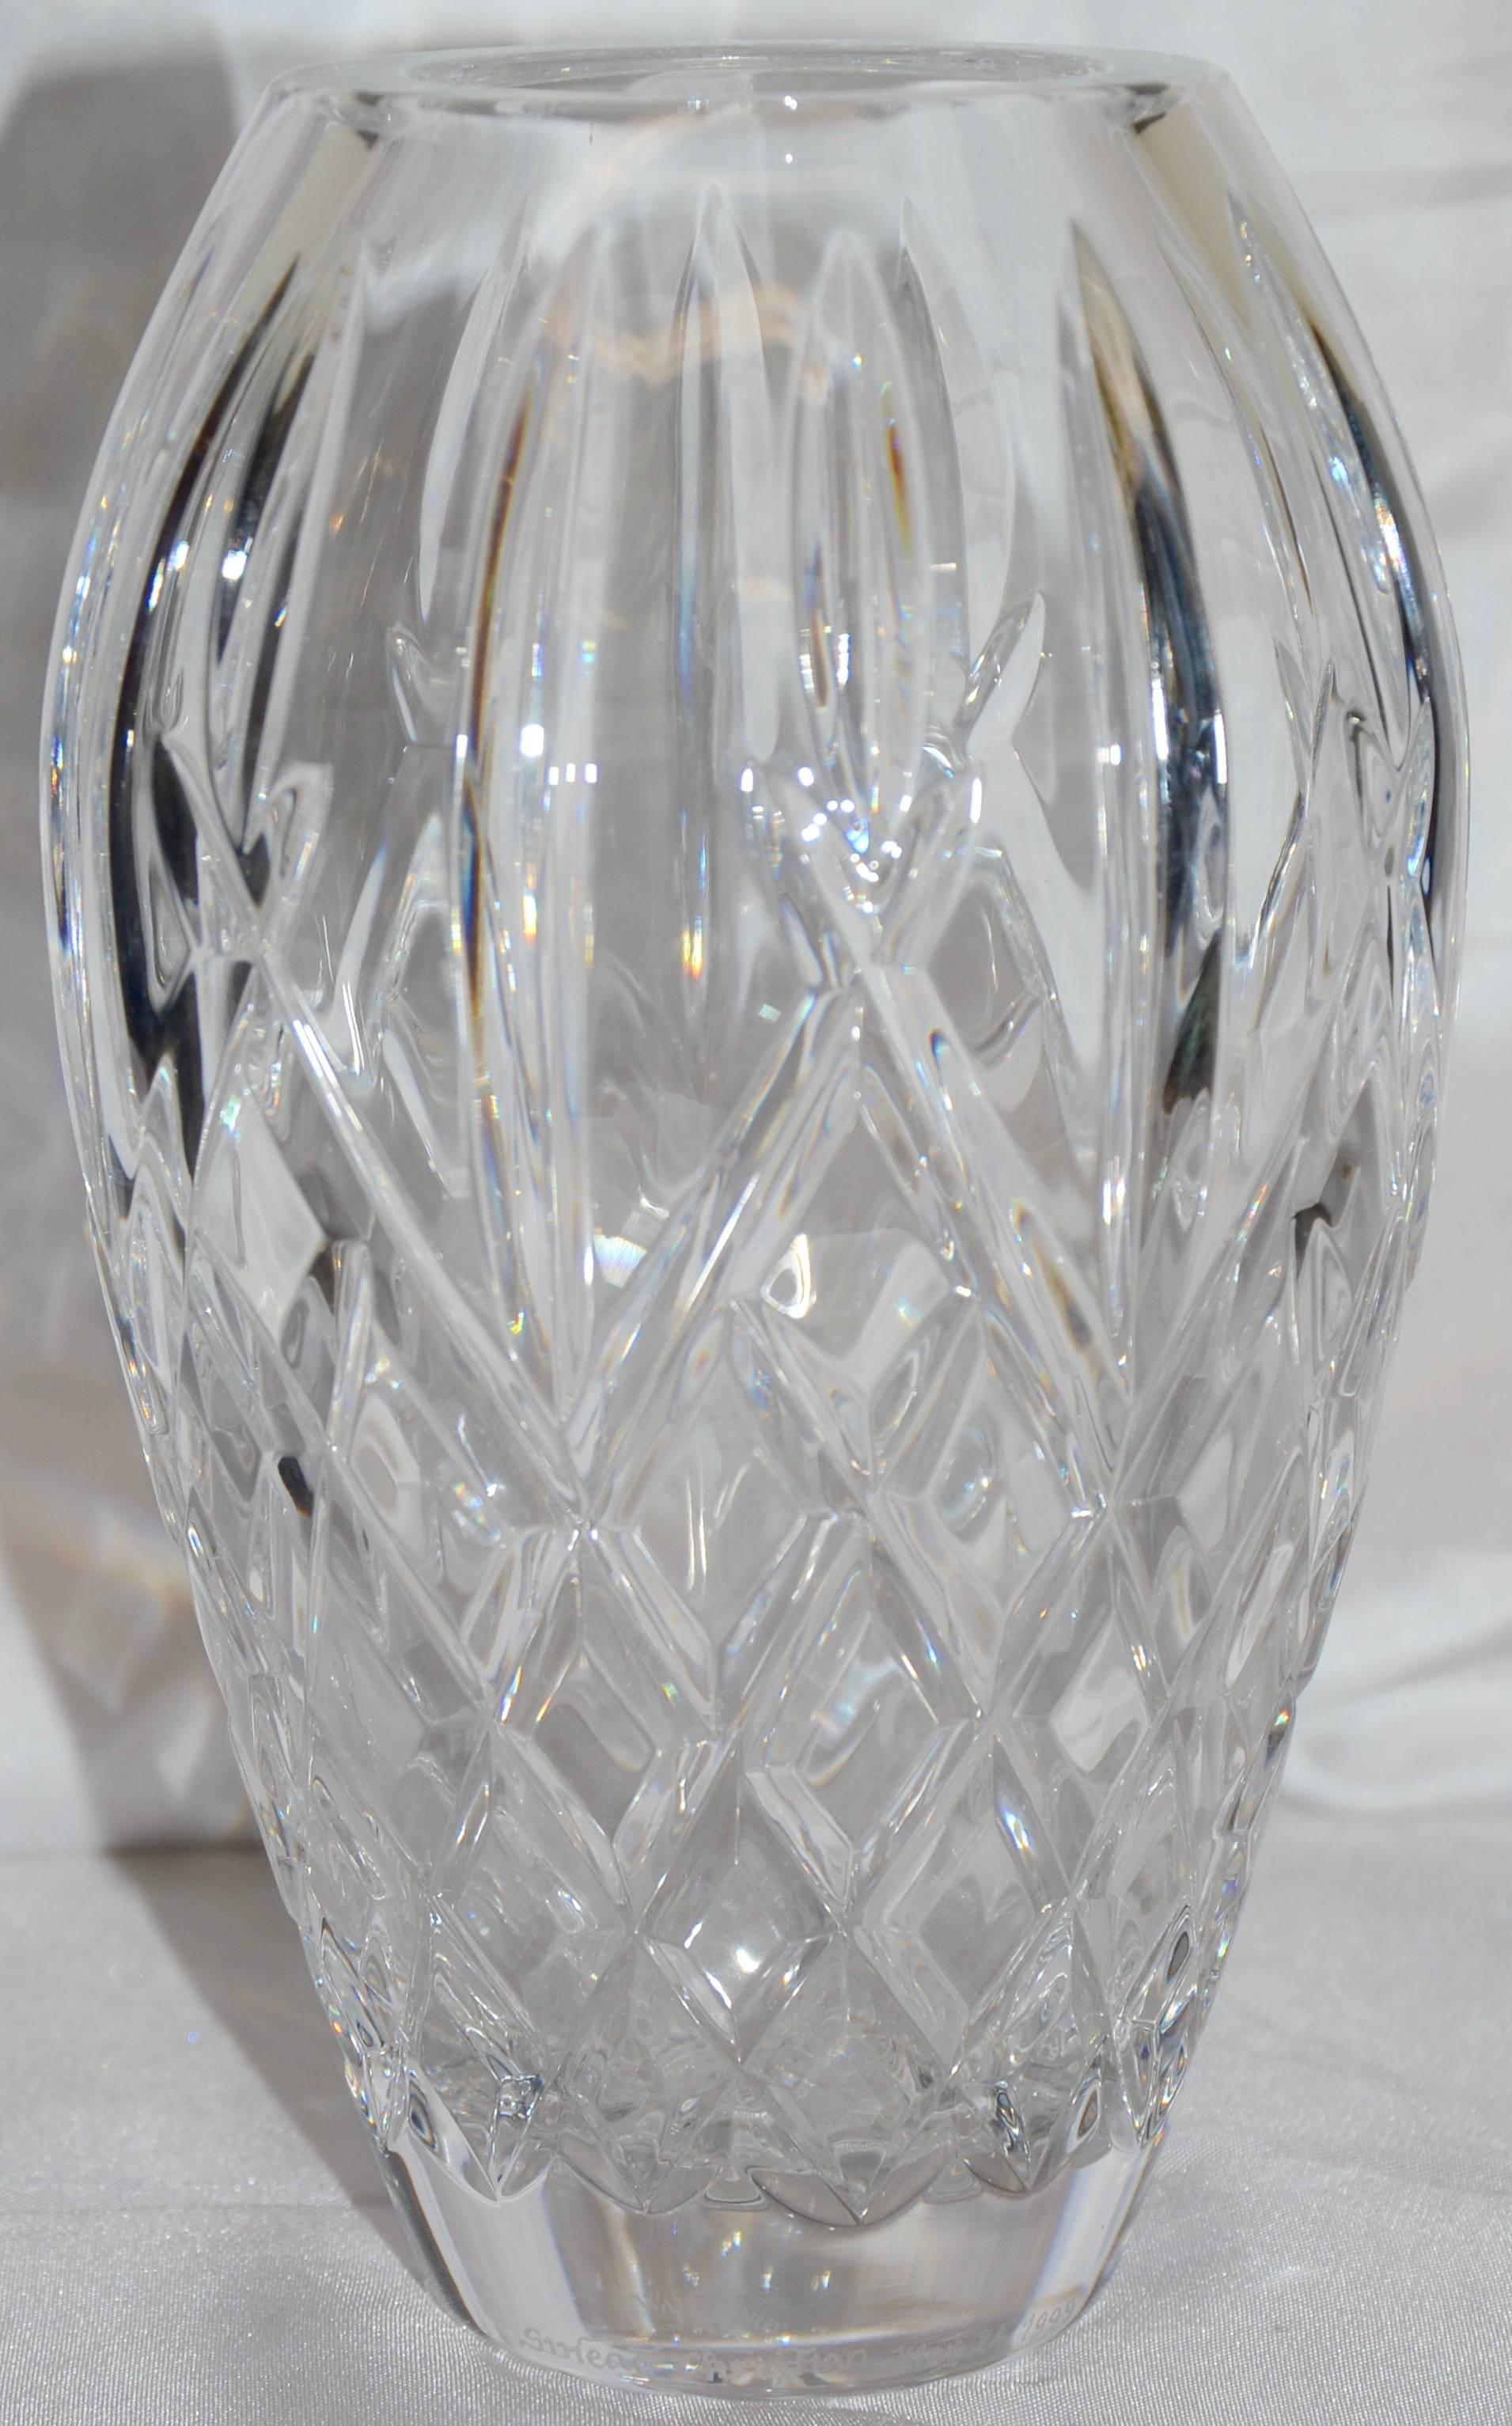 The Waterford mark stands for quality and you will find that in this diamond pattern, heavy crystal vase. The edges are polished smooth and you can feel the quality of the glass. It is signed by Sinead Christian and dated May 24, 1999.